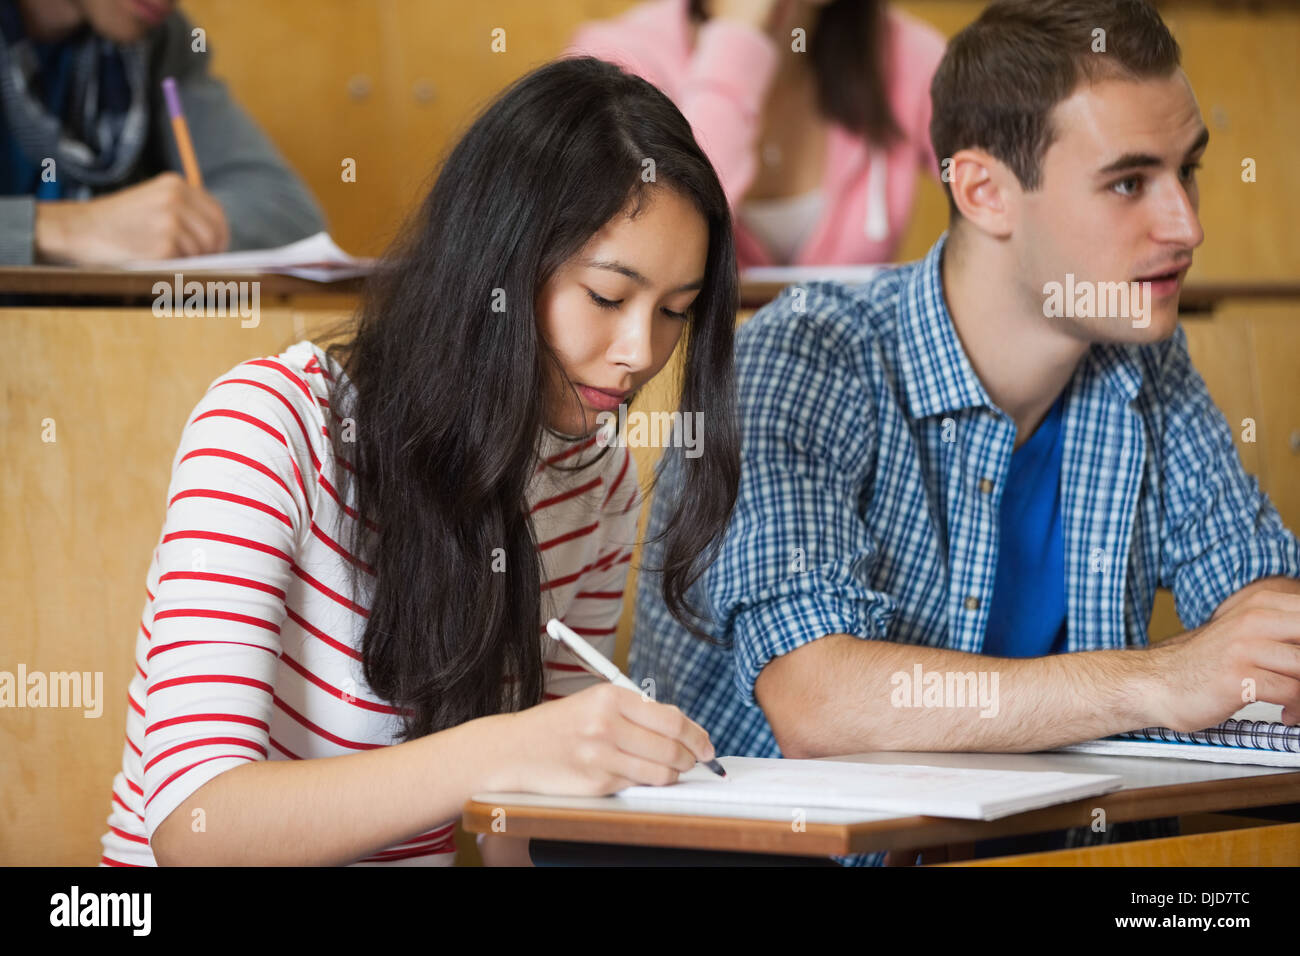 Focused students taking notes in lecture hall Stock Photo